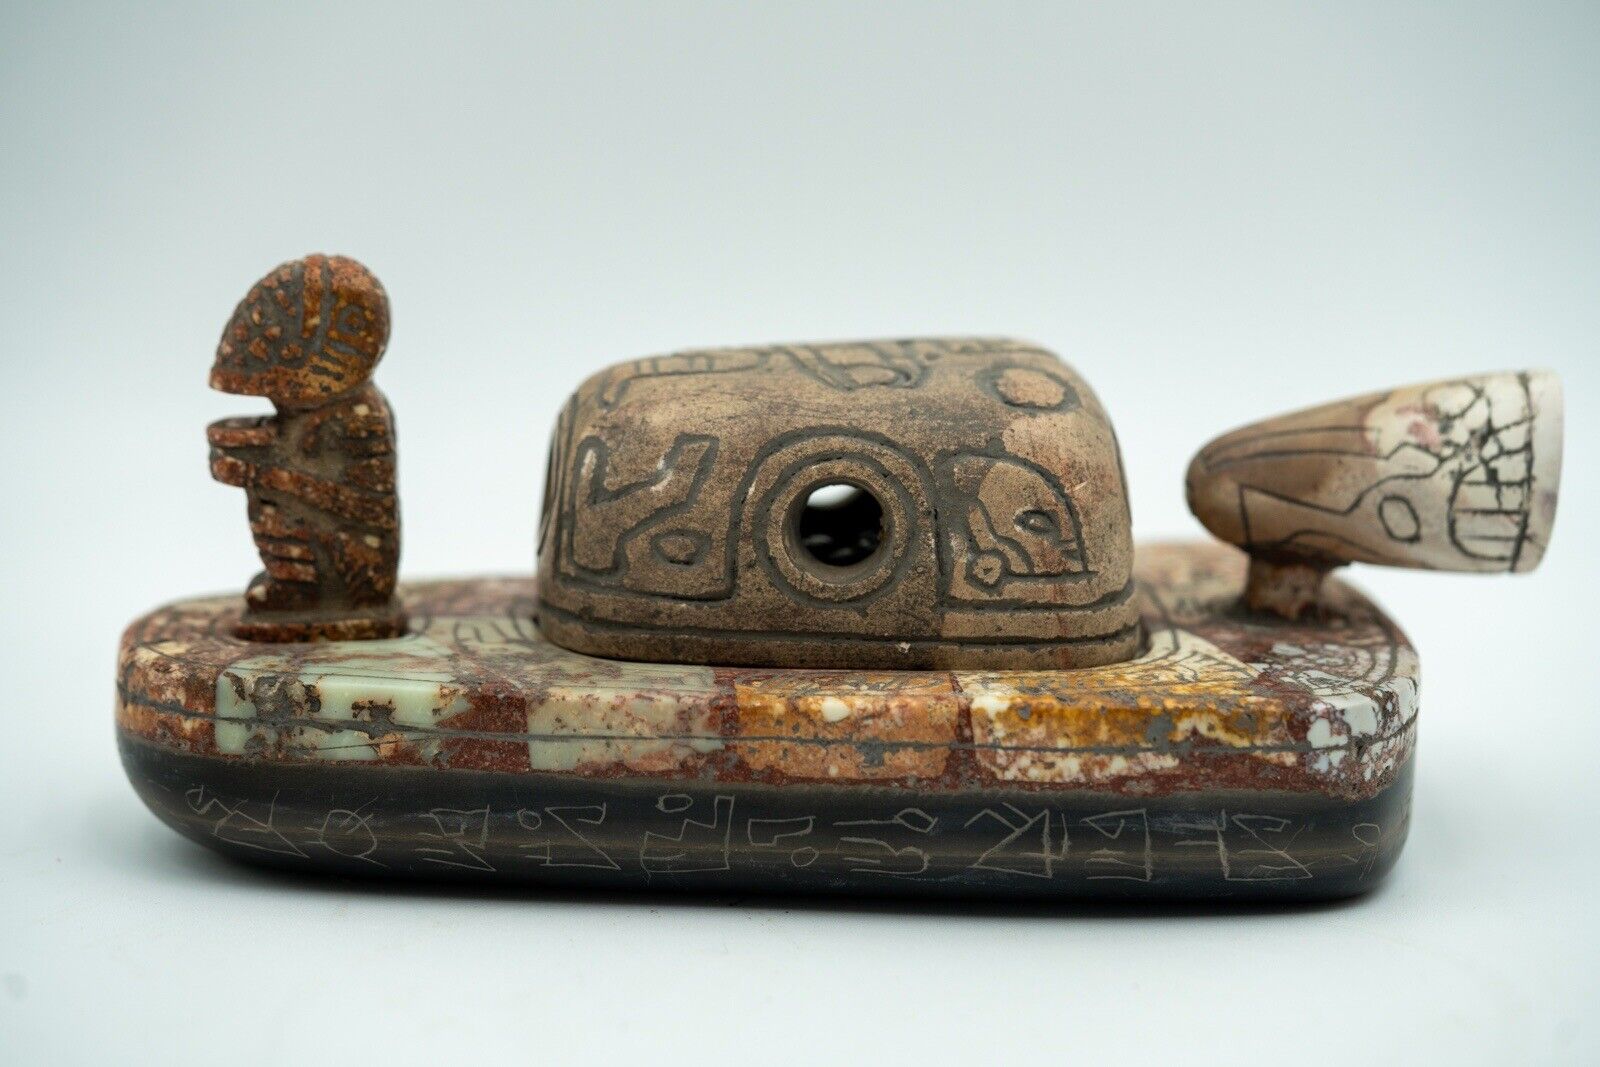 Large Ojuelos De Jalisco Mosaic Ancient Alien Carvings UFO Ship With Dig Video